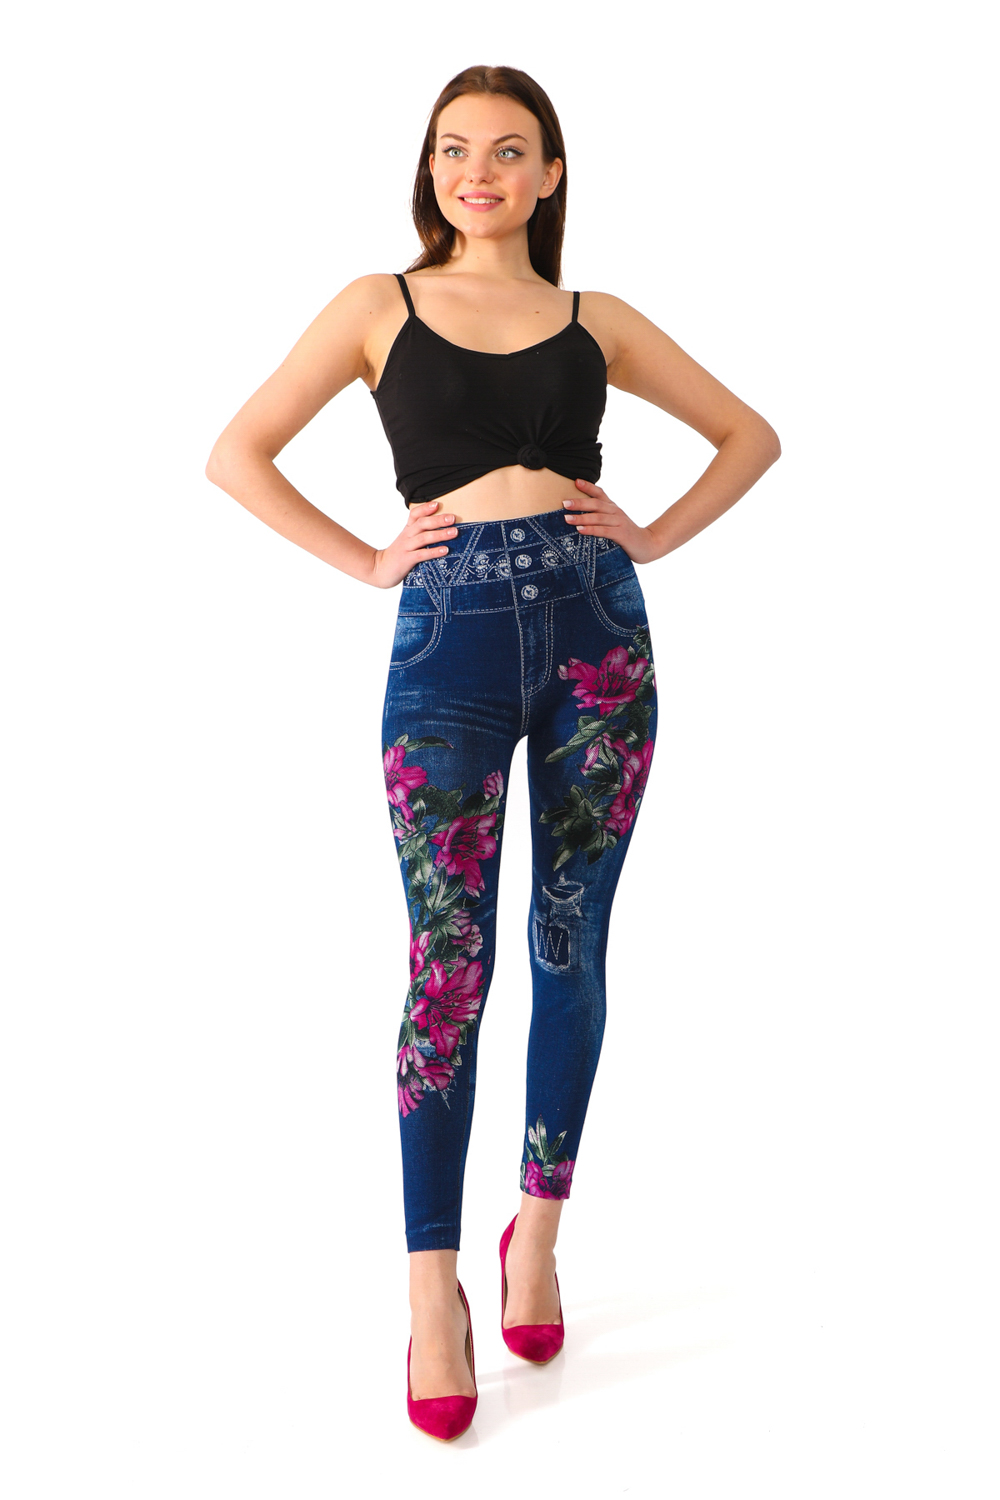 Sphynx Cat Tattoos All Over Printed Women's Tanktop Leggings Set – Perfect  Workout Outfits – Gifts For Cat Lovers – Furlidays